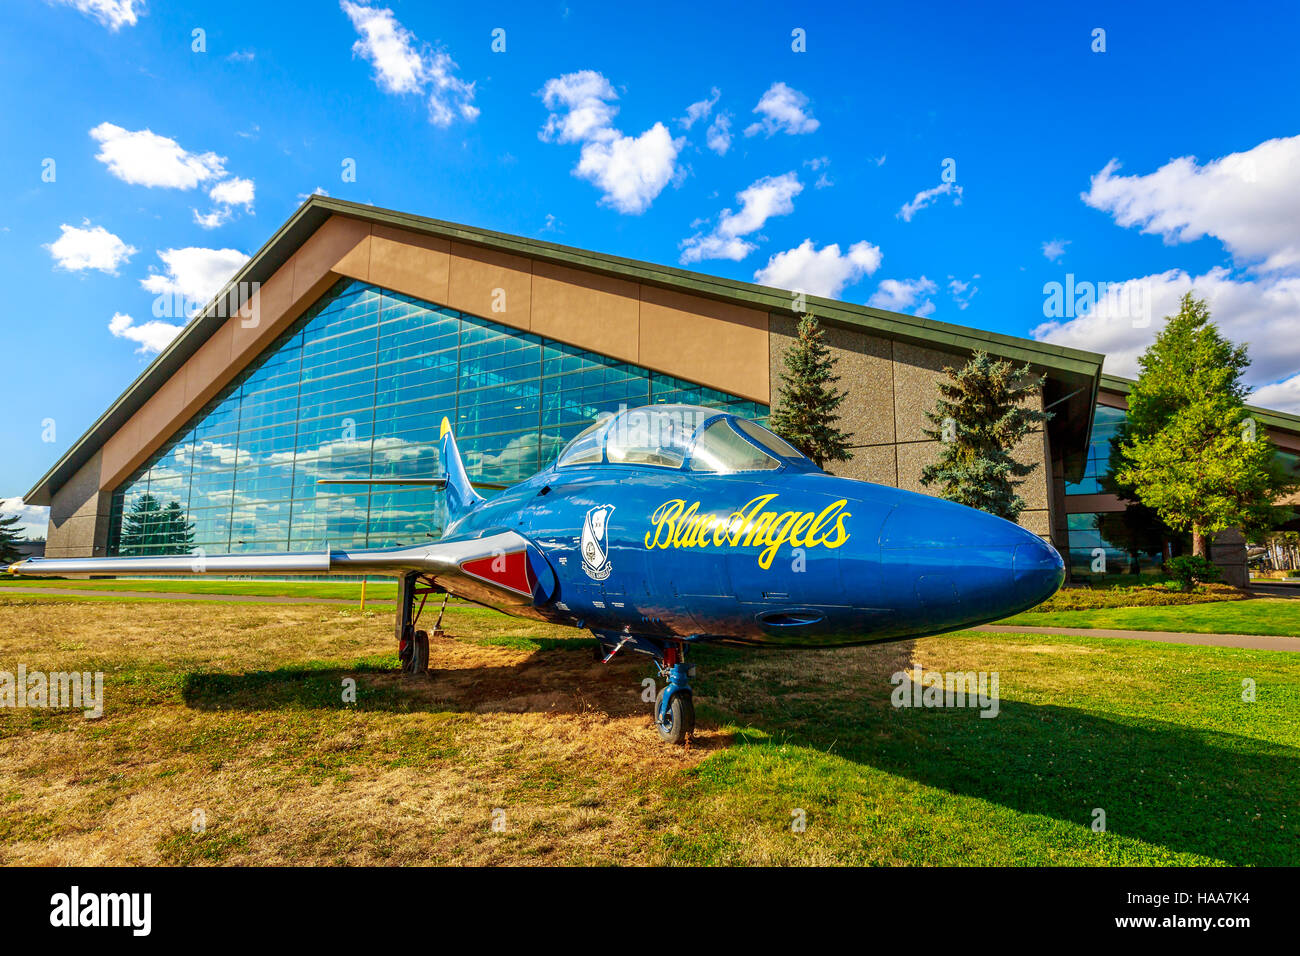 McMinnville, Oregon - August 31, 2014: Grumman TF-9J Cougar fighter aircraft in the color of the 'Blue Angels' on exhibition at Evergreen Aviation & S Stock Photo